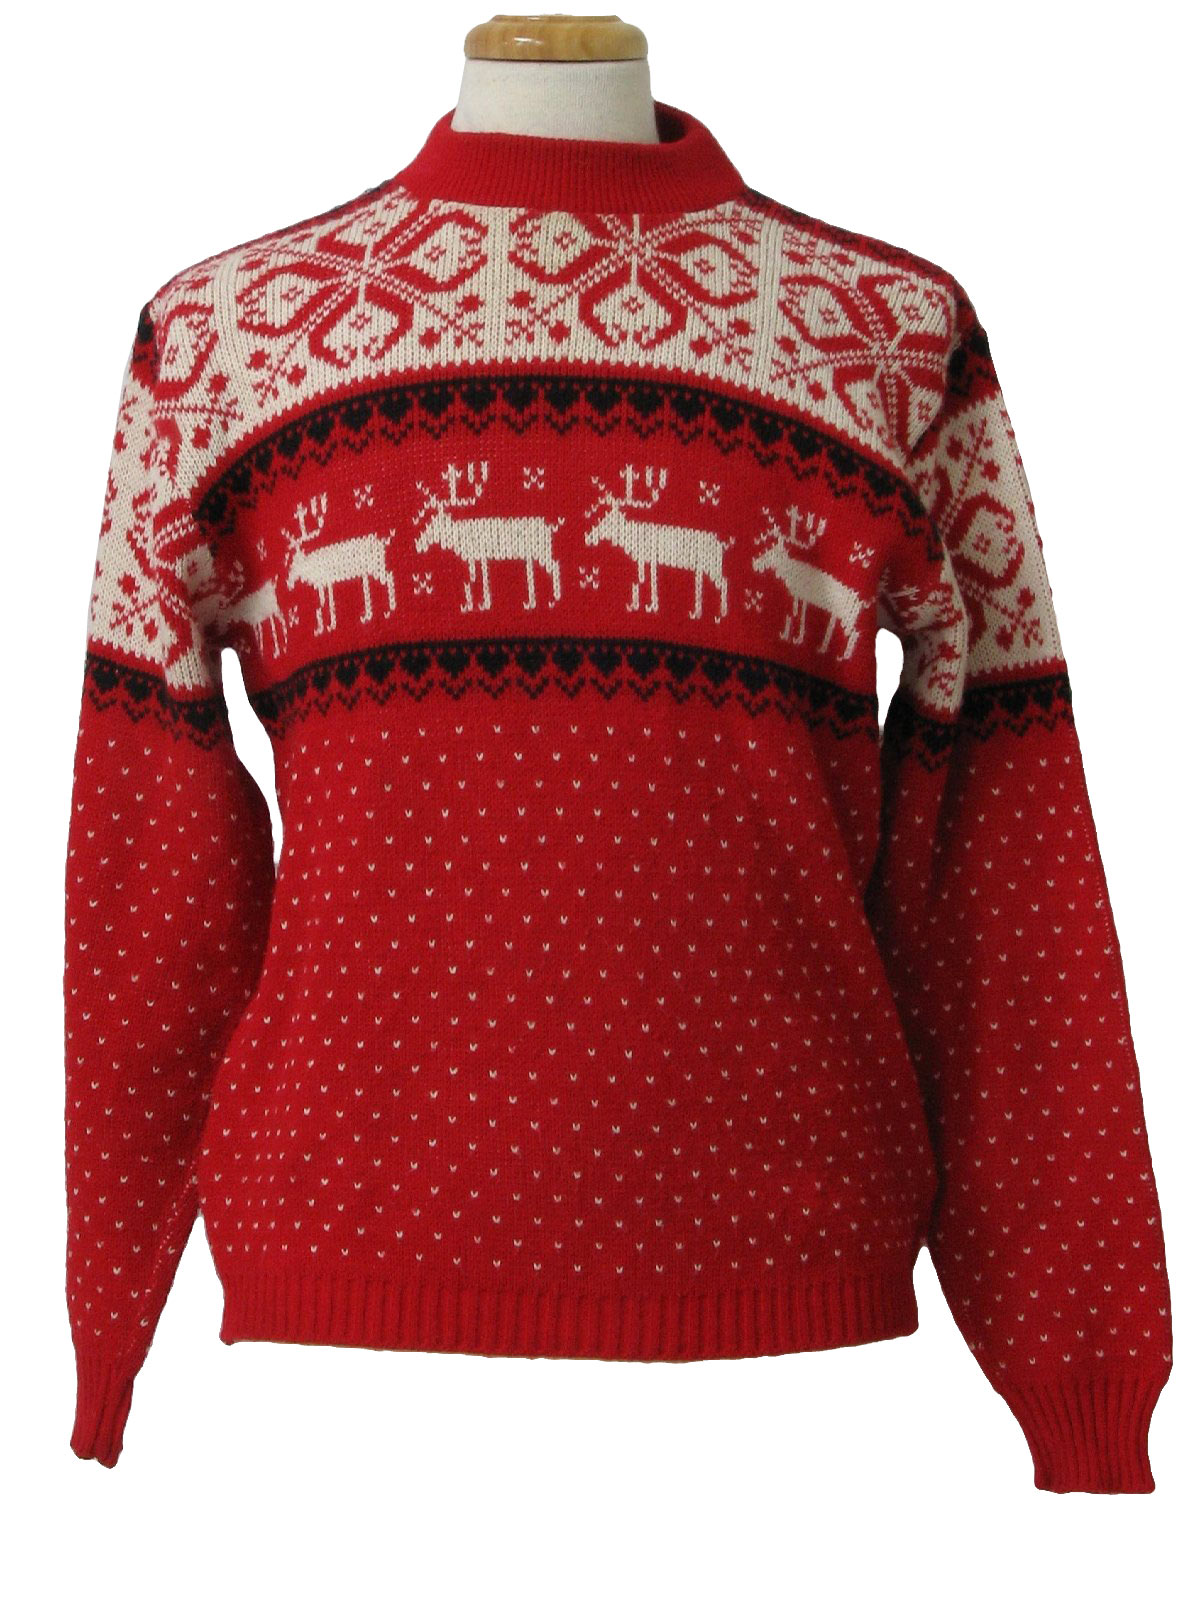 Amana Seventies Vintage Sweater: 70s -Amana- Mens red, white and ...